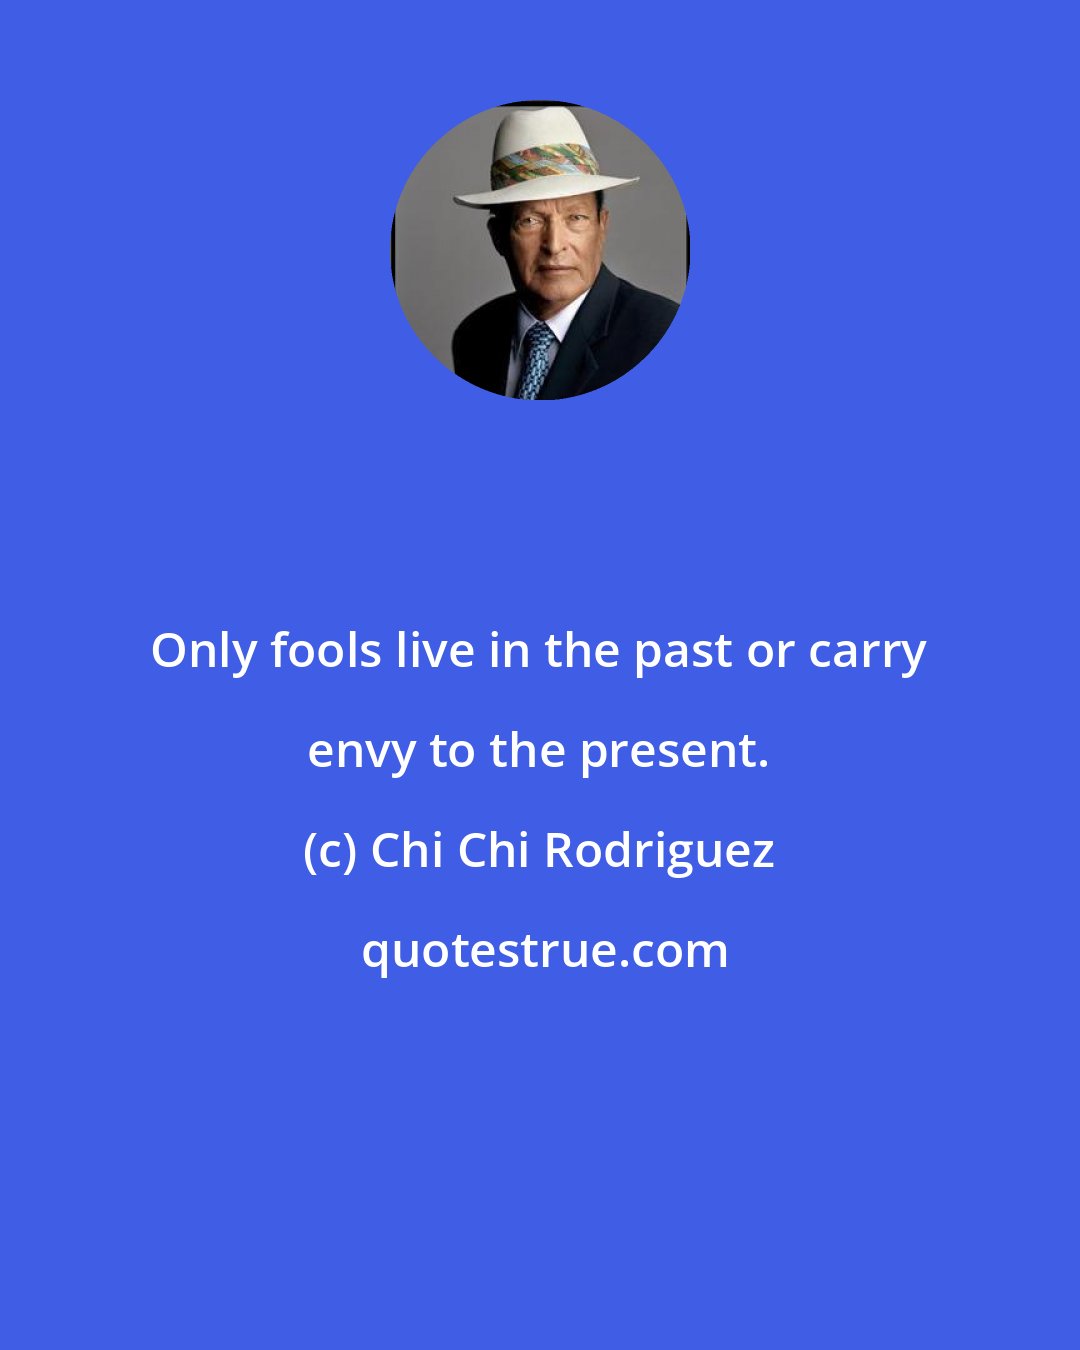 Chi Chi Rodriguez: Only fools live in the past or carry envy to the present.